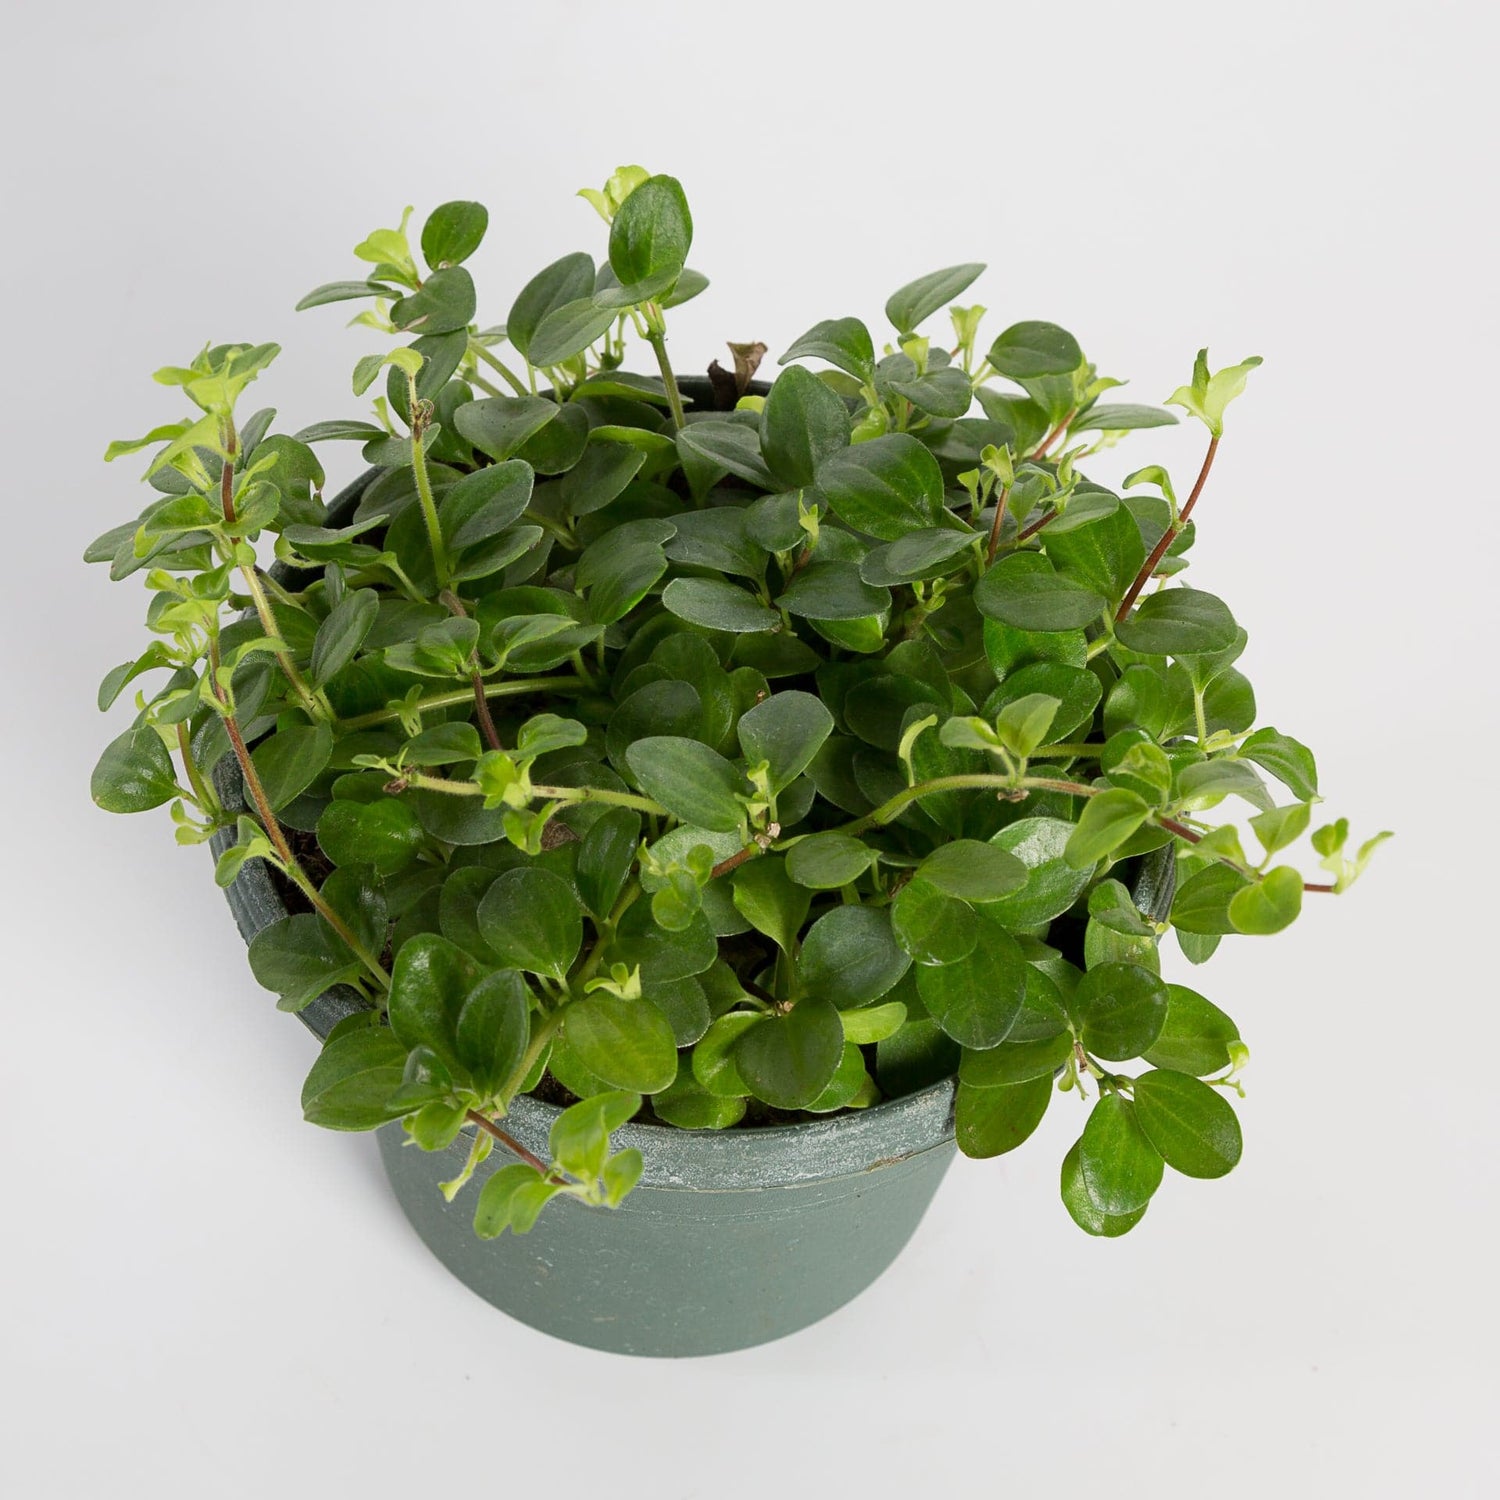 Urban Sprouts Plant 6" in nursery pot Peperomia 'Jitterbug'